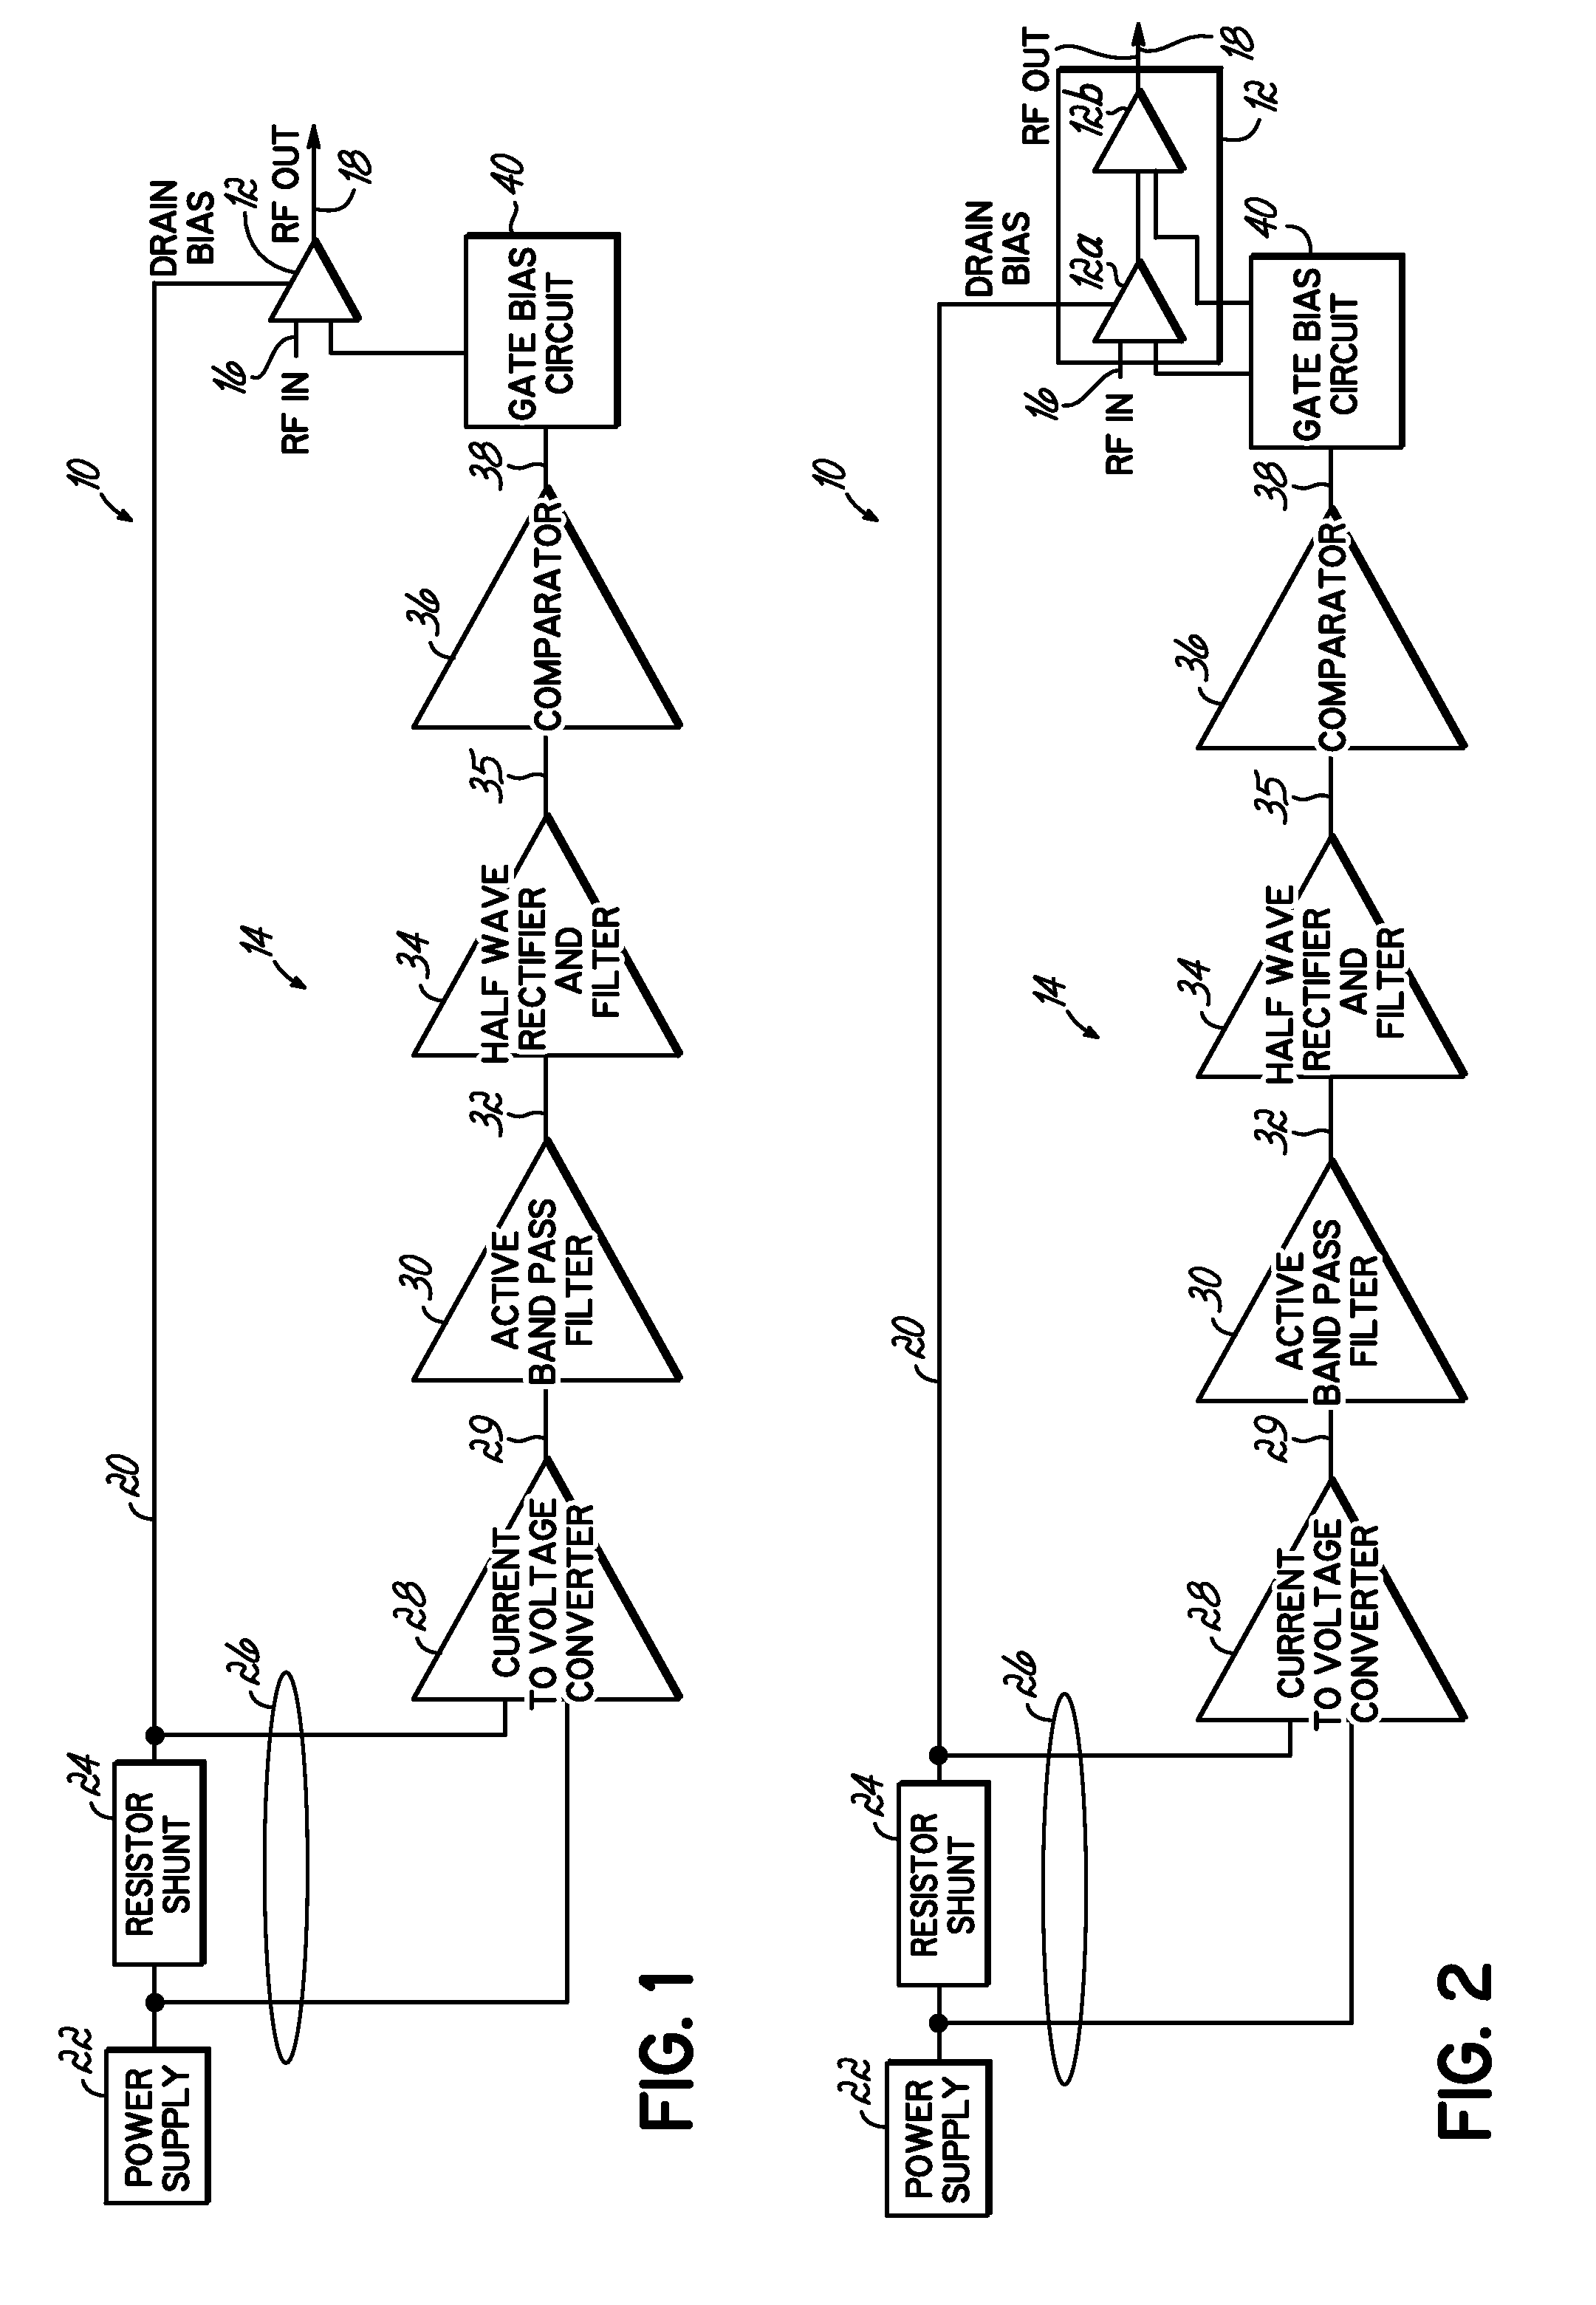 RF amplifier with pulse detection and bias control